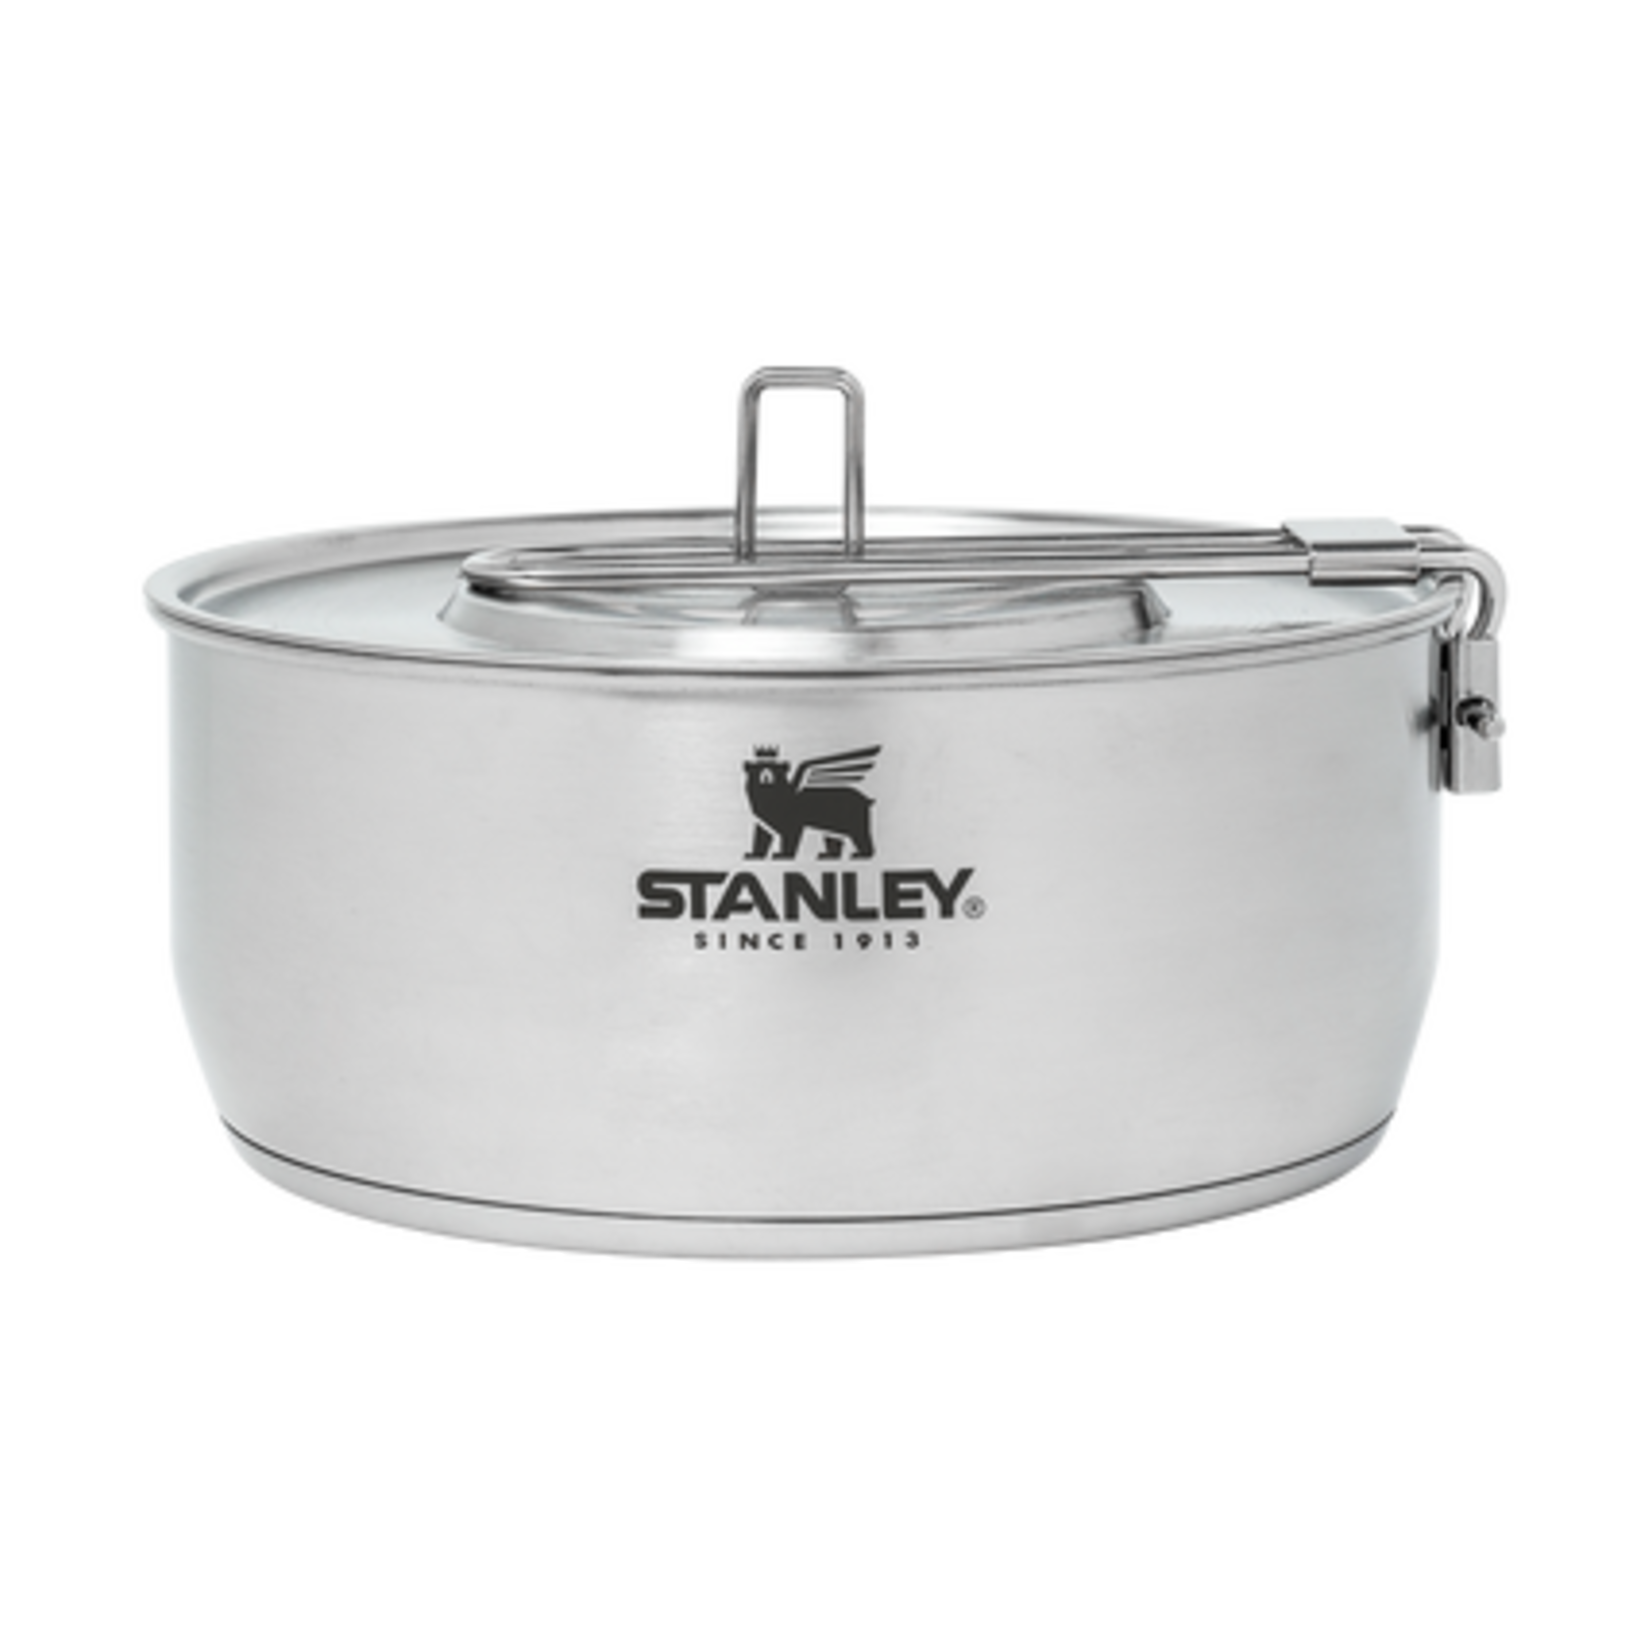 Stanley Adventure Happy Hour 4x System - Hike & Camp